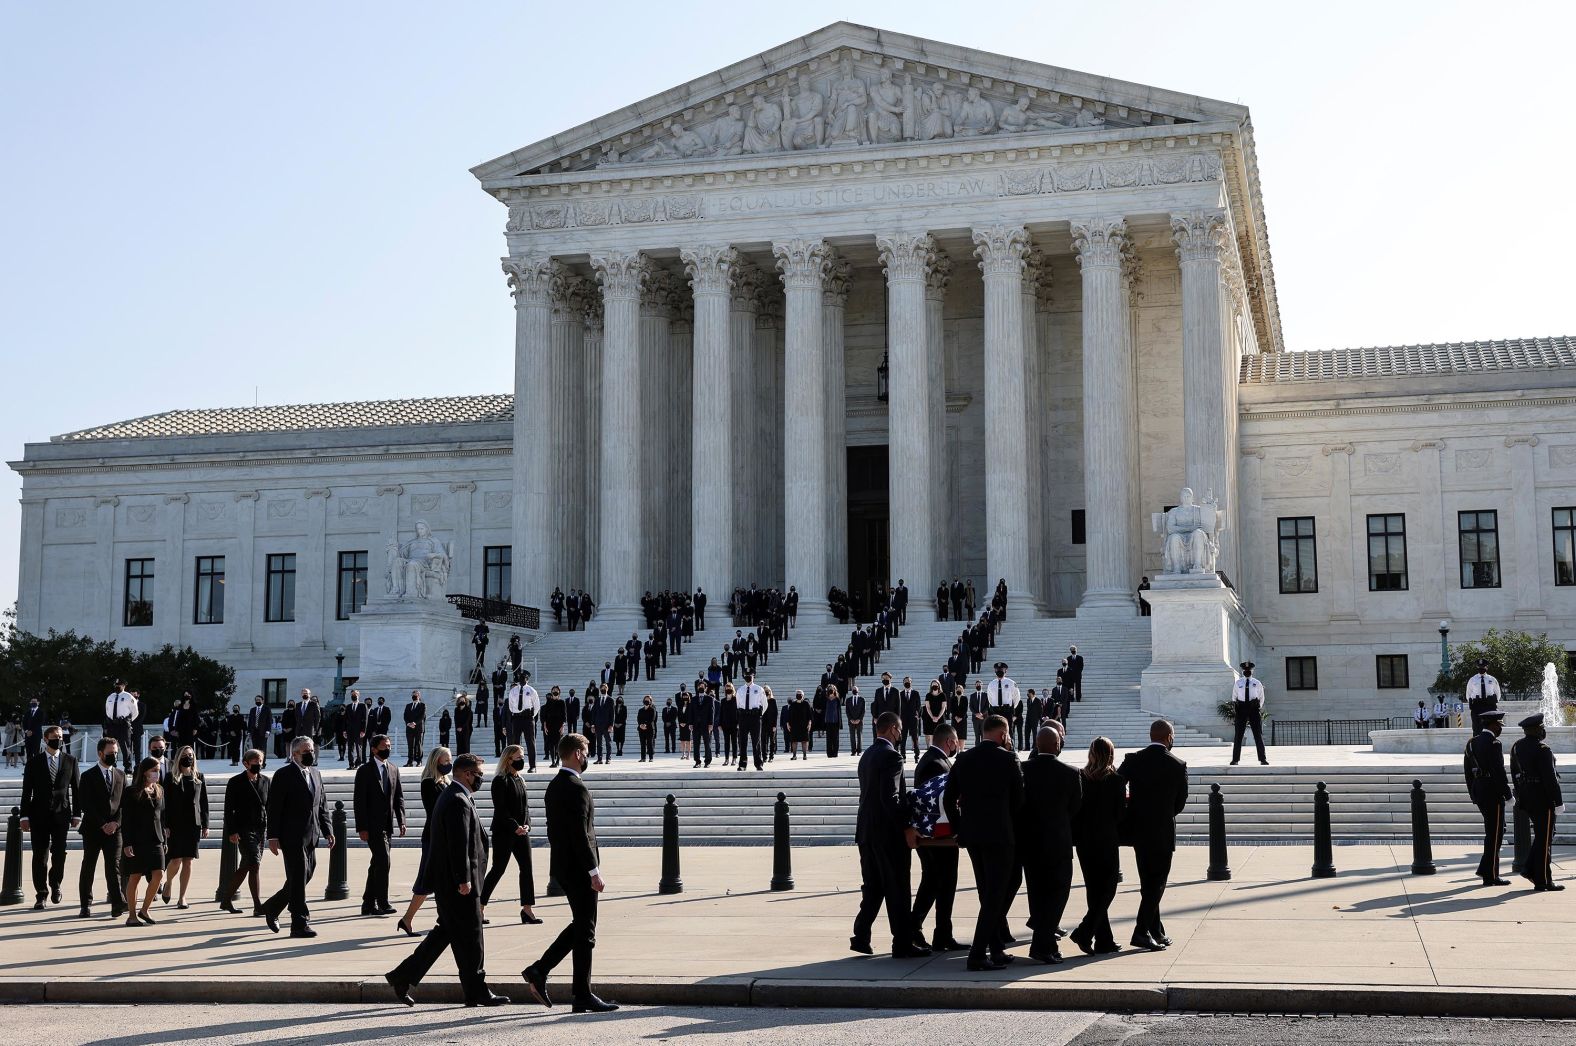 The casket arrived in front of the Supreme Court just before 9:30 a.m. ET on Wednesday, and a private ceremony with family, close friends and the justices took place in the Great Hall at the court.